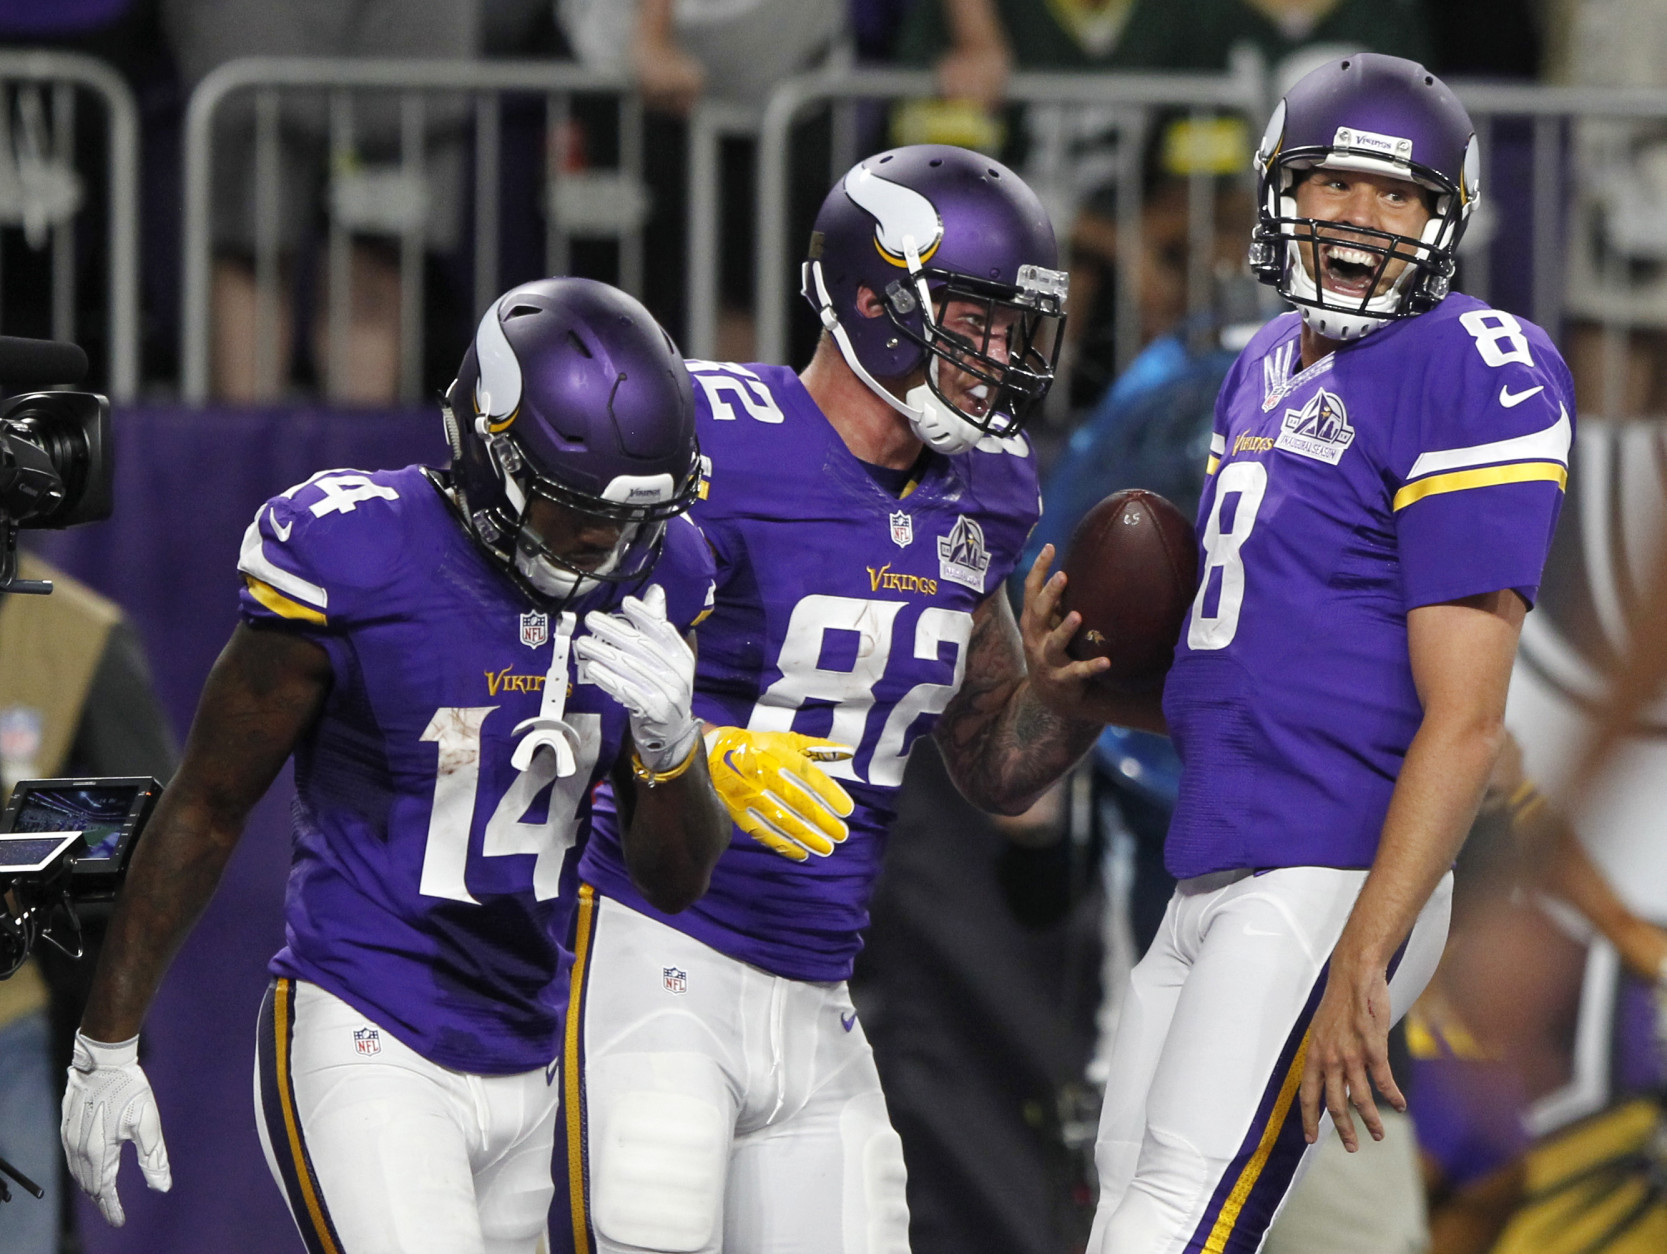 Minnesota Vikings tight end Kyle Rudolph, center, celebrates with teammates Stefon Diggs, left, and quarterback Sam Bradford, right, after catching an 8-yard touchdown pass during the first half of an NFL football game against the Green Bay Packers Sunday, Sept. 18, 2016, in Minneapolis. (AP Photo/Andy Clayton-King)